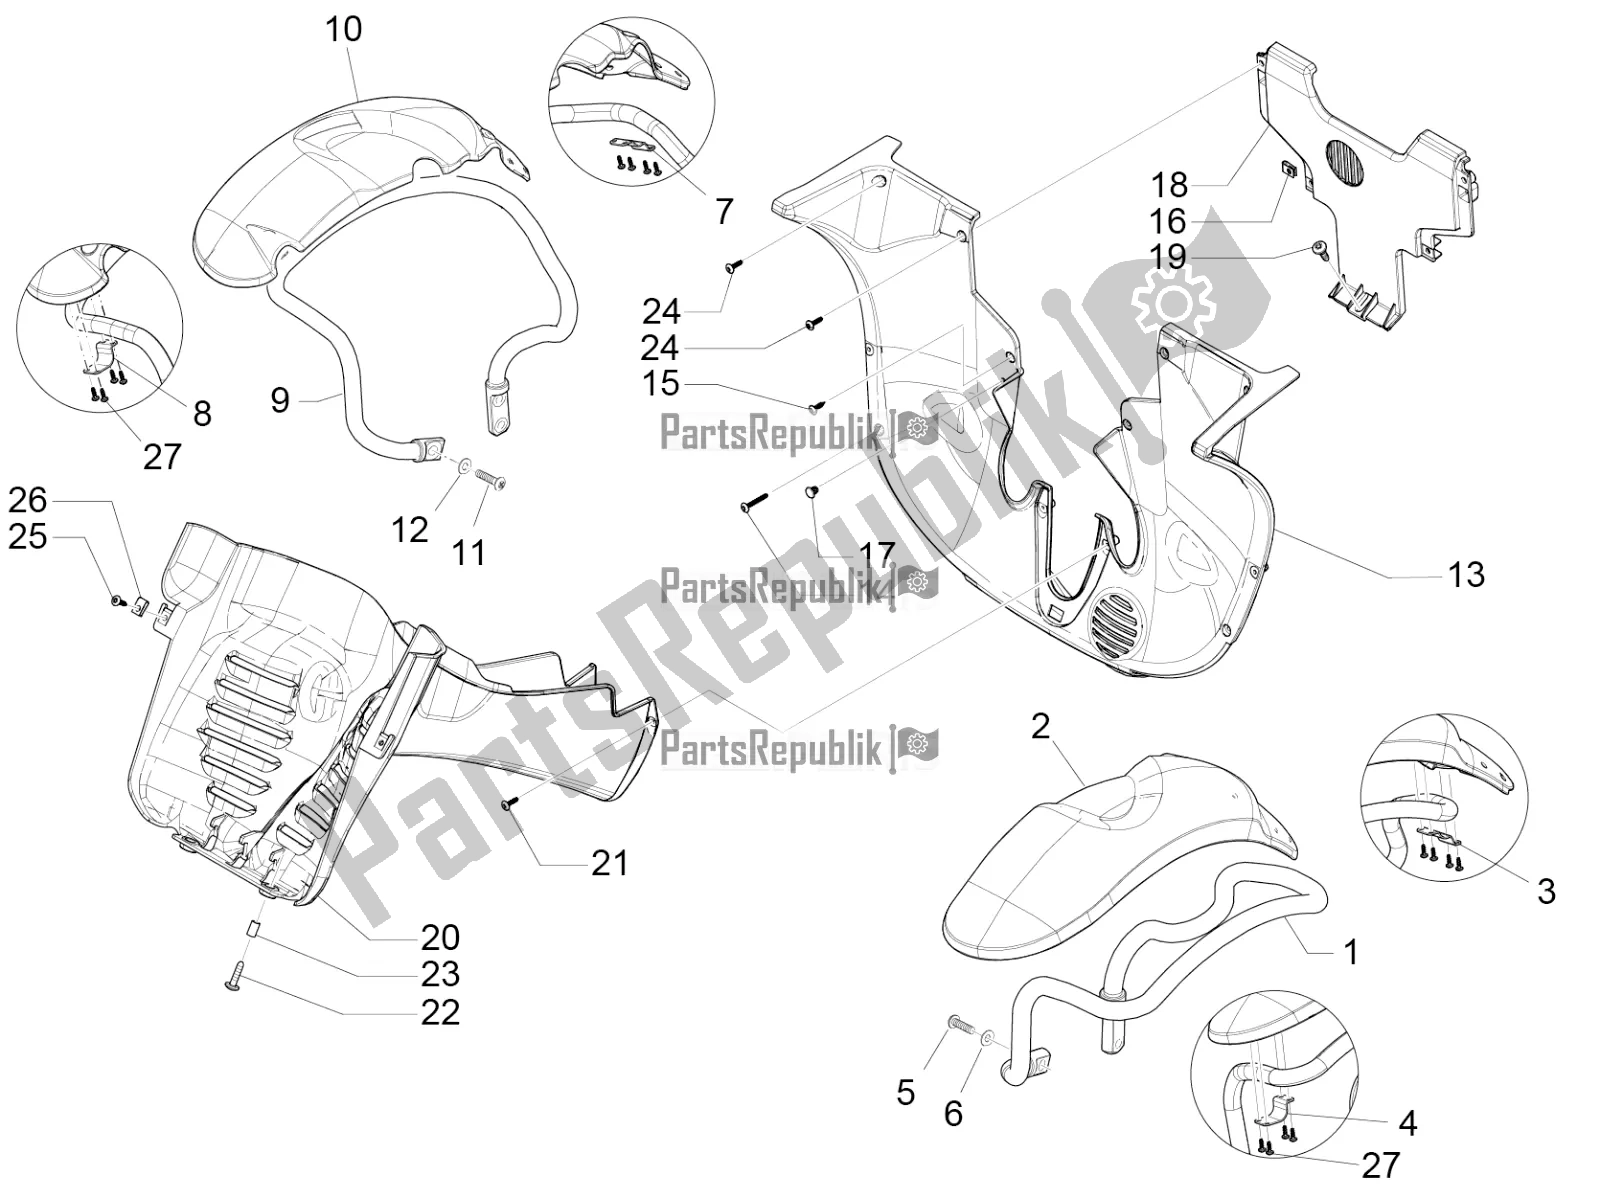 All parts for the Wheel Huosing - Mudguard of the Piaggio MP3 400 2020